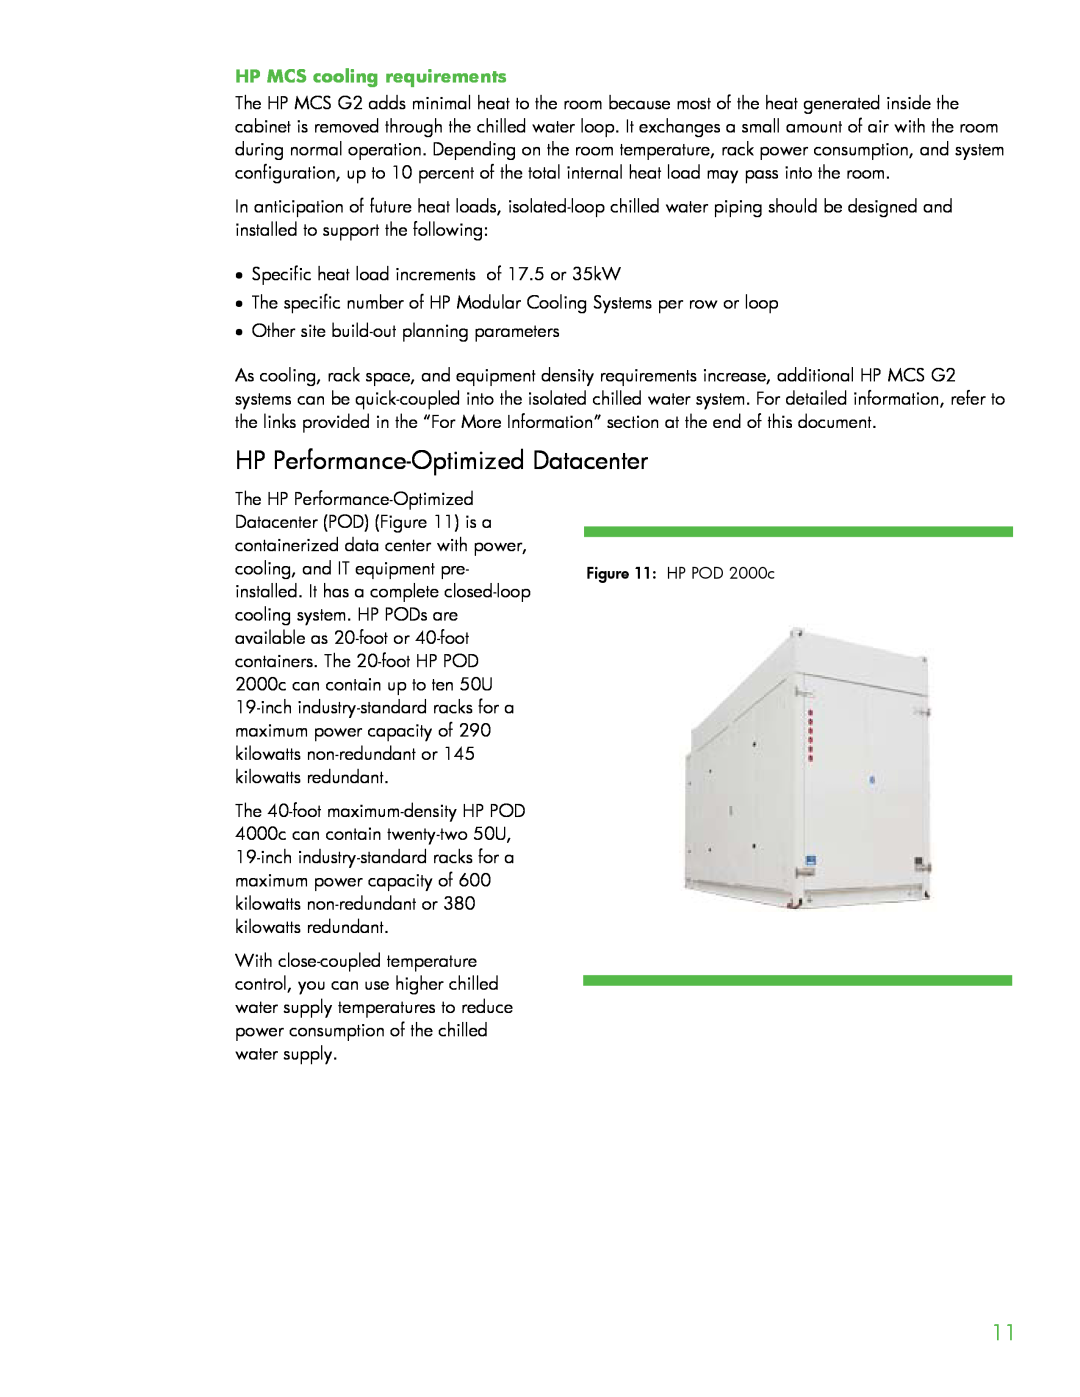 HP Modular Cooling System manual HP Performance-Optimized Datacenter, HP MCS cooling requirements 